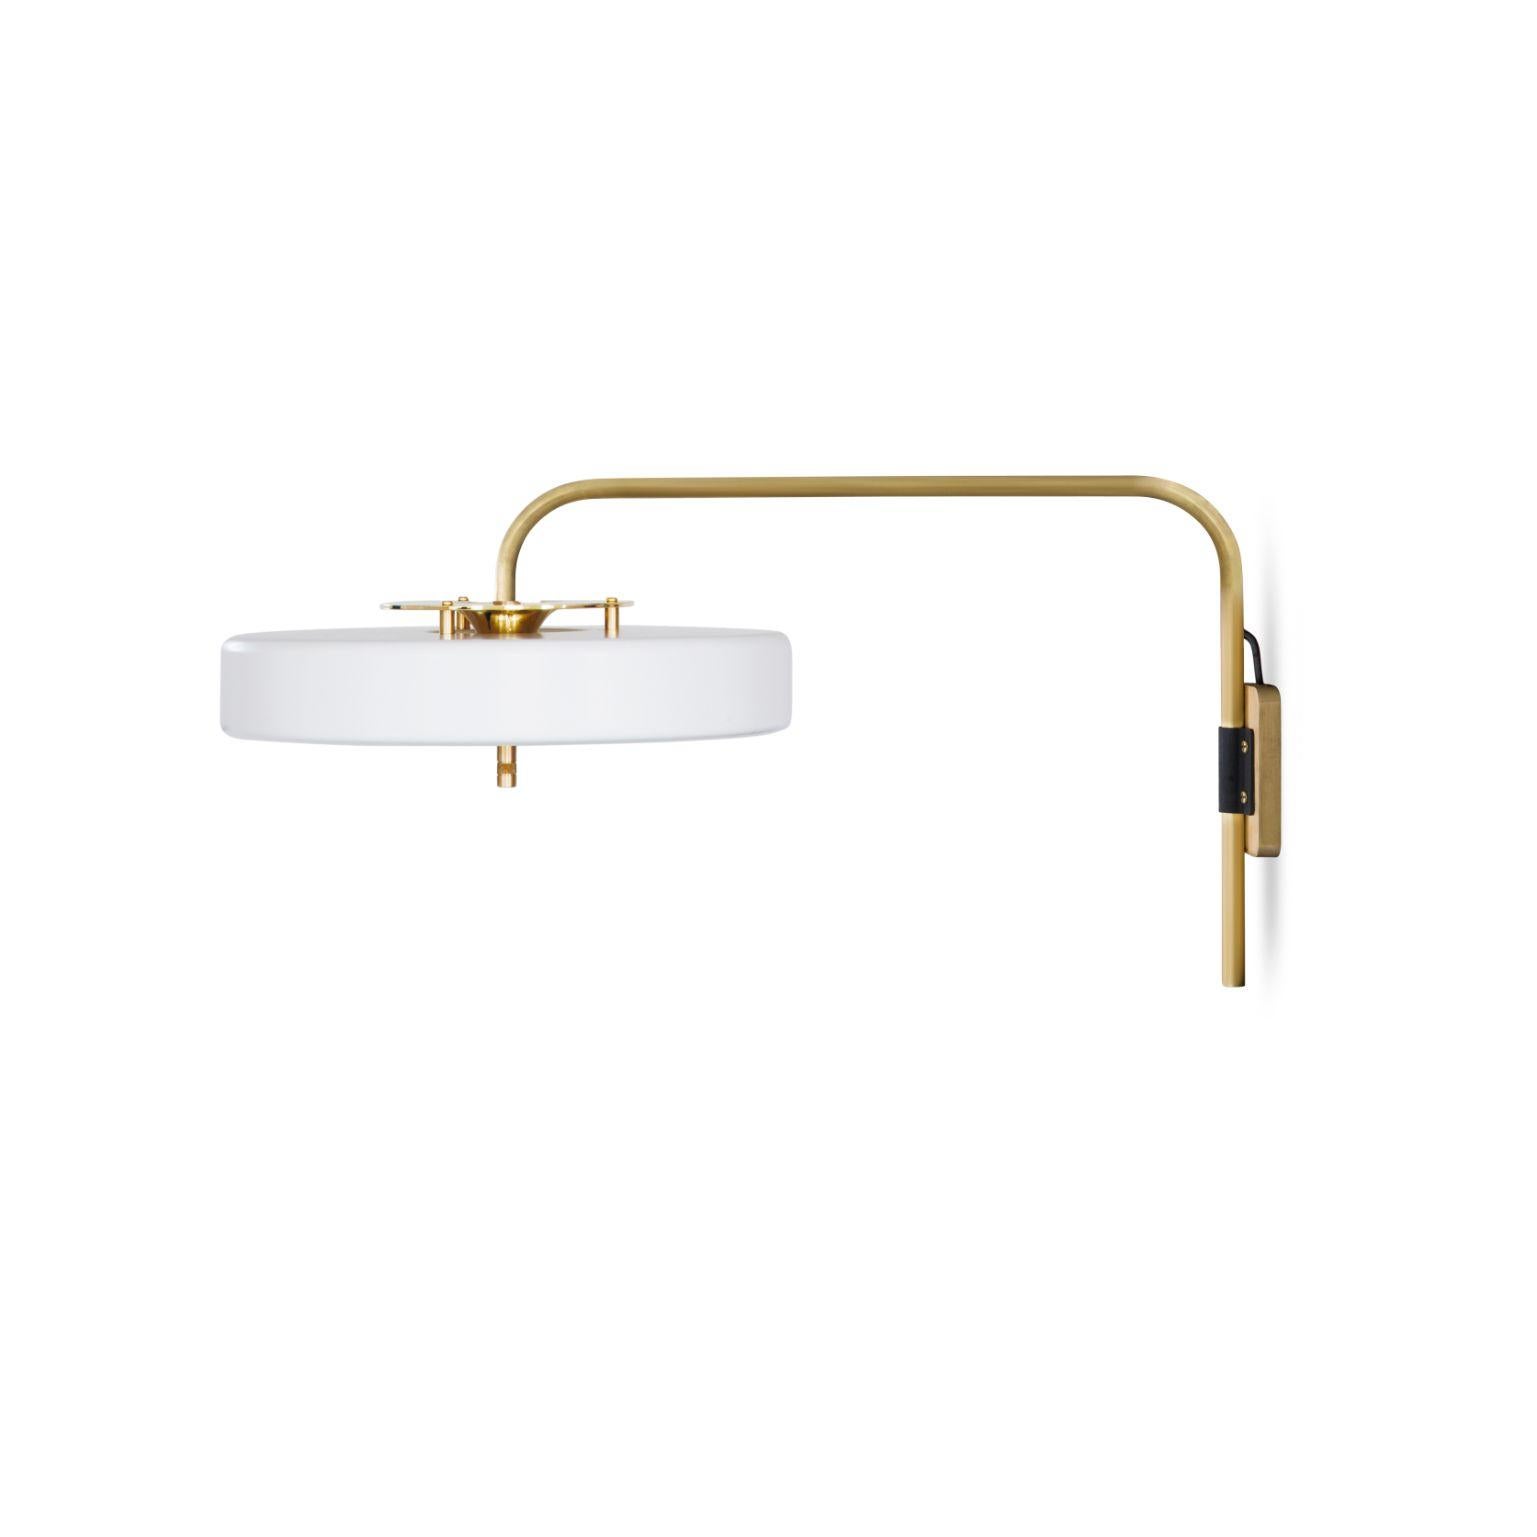 Revolve wall light - polished brass - white by Bert Frank
Dimensions: 31 x 63 x 35 cm
Materials: Brass, steel

Available in brushed brass

Flush-fitting opal glass shade with central dome of polished marble – white Carrara or green Guatemala – held